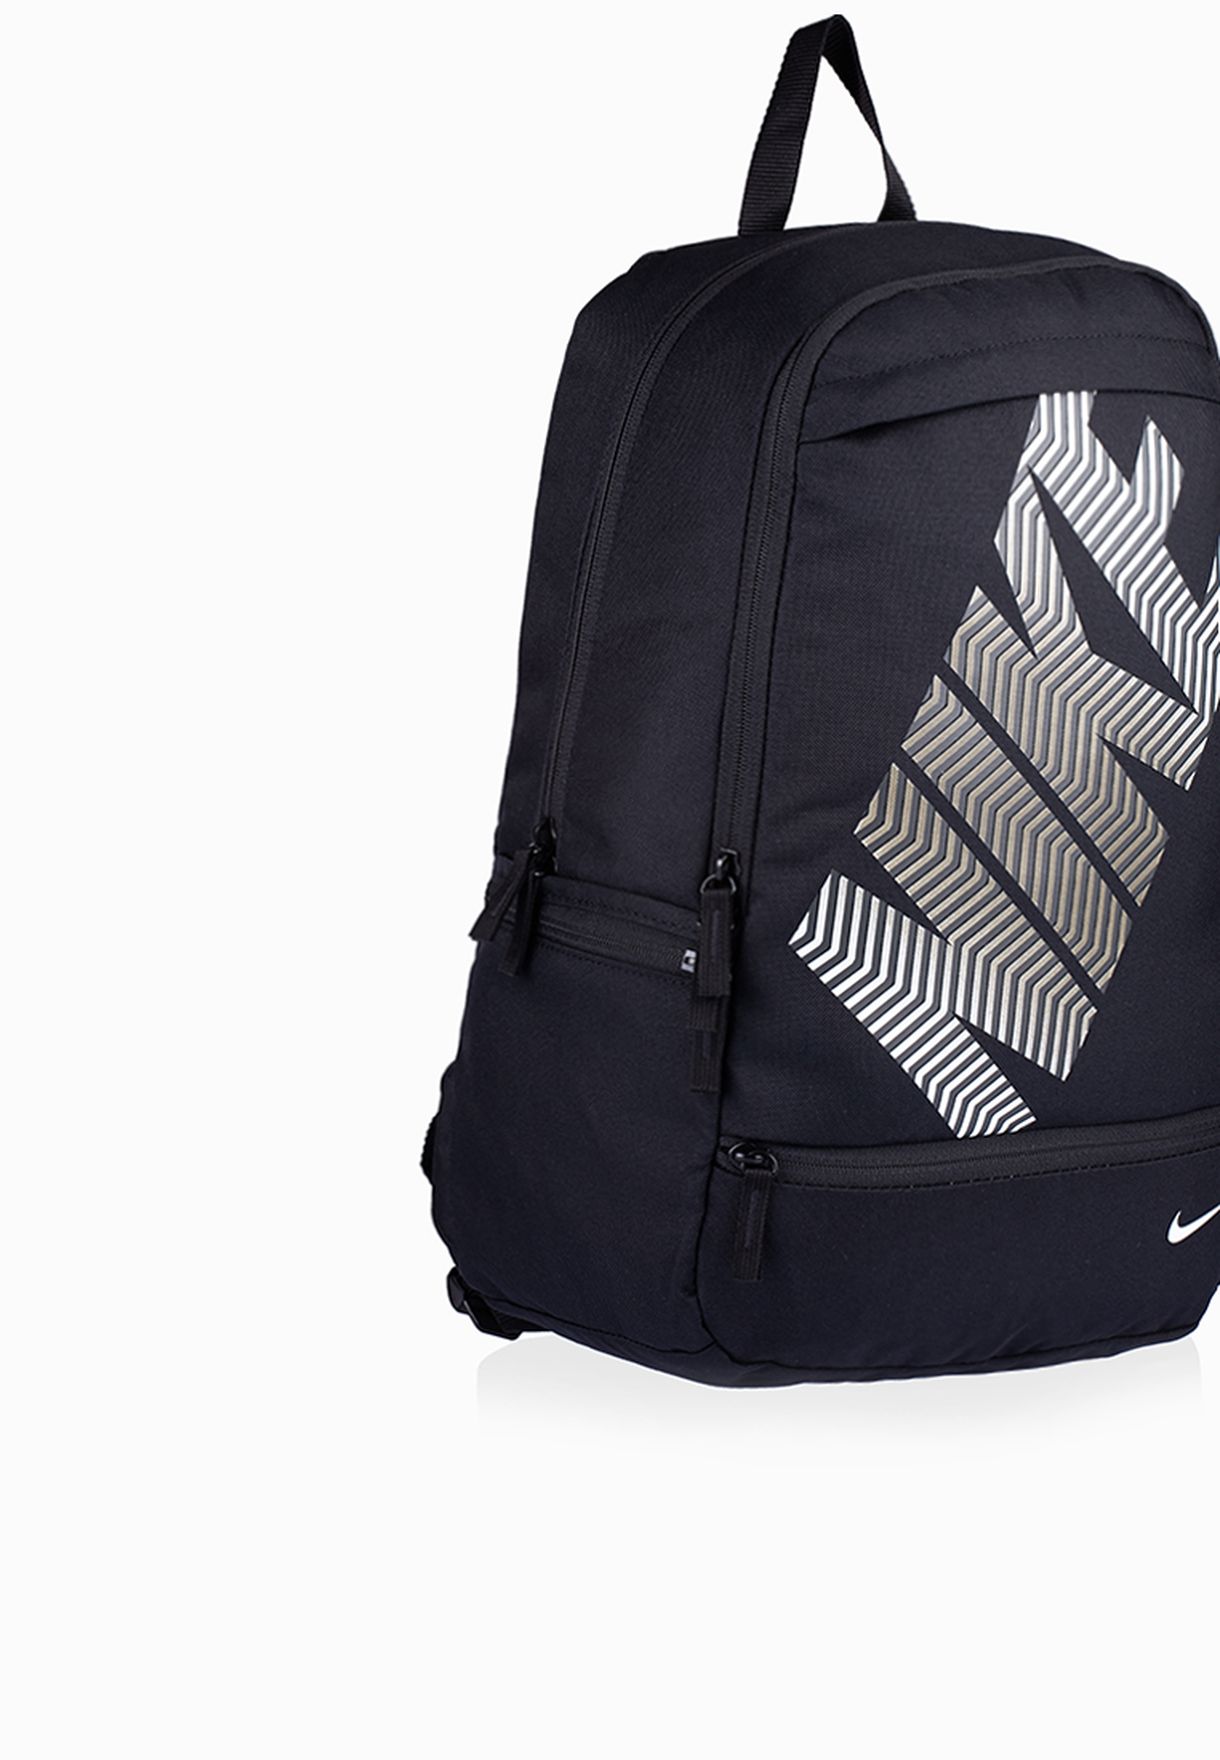 Nike black Backpack for Men Kuwait city, other cities